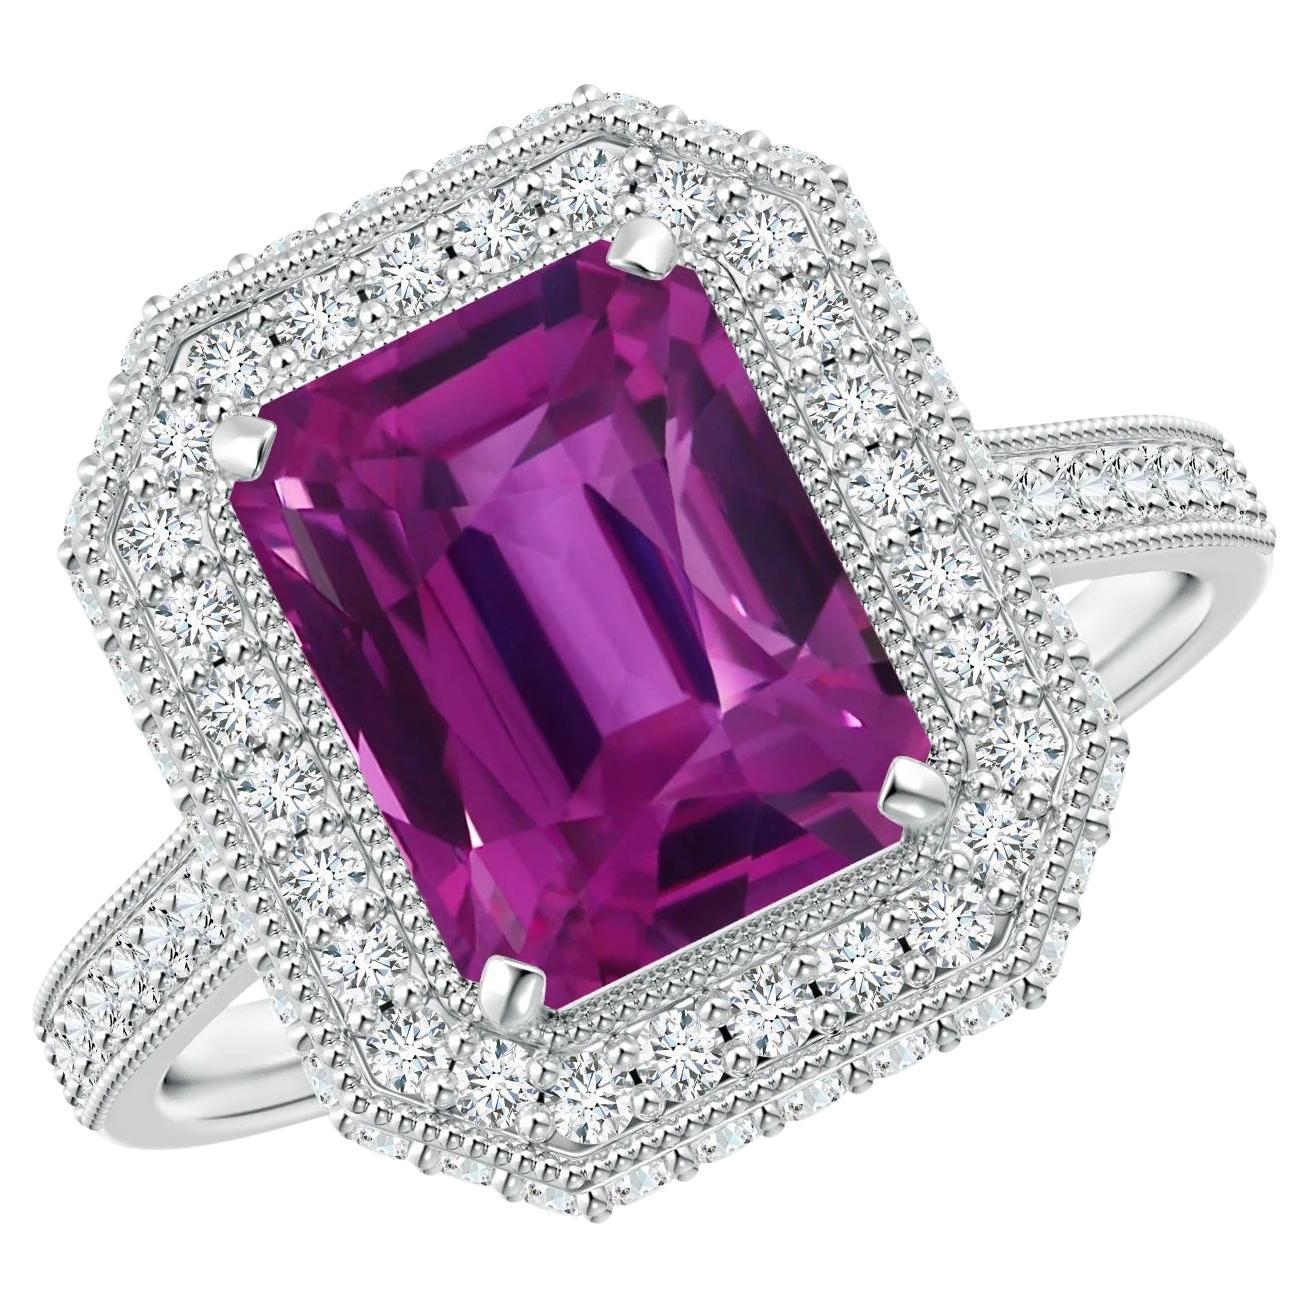 ANGARA GIA Certified Natural Emerald Cut Pink Sapphire Halo Ring in White Gold